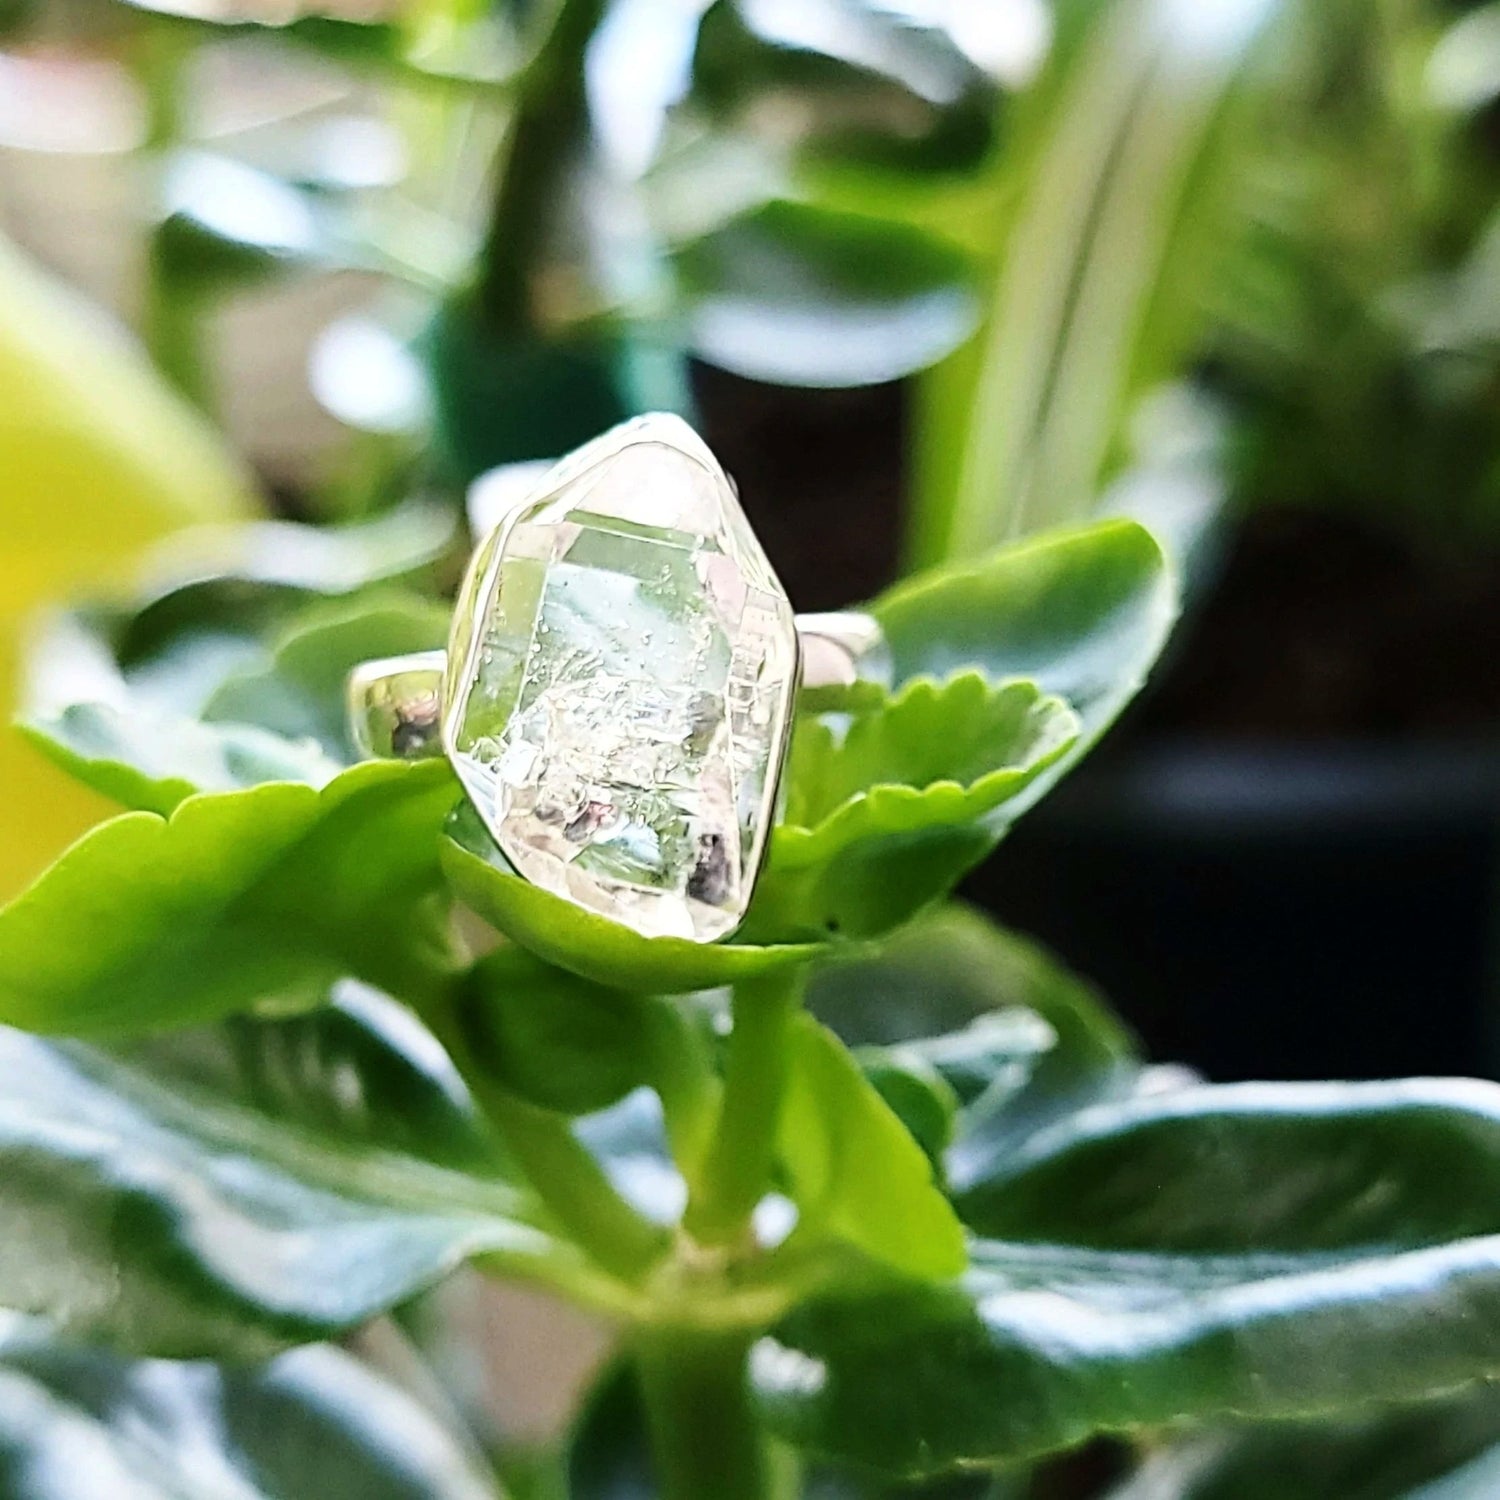 Herkimer Diamond Solitaire Ring Sterling Silver Band Rainbow HQ - Elevated Metaphysical